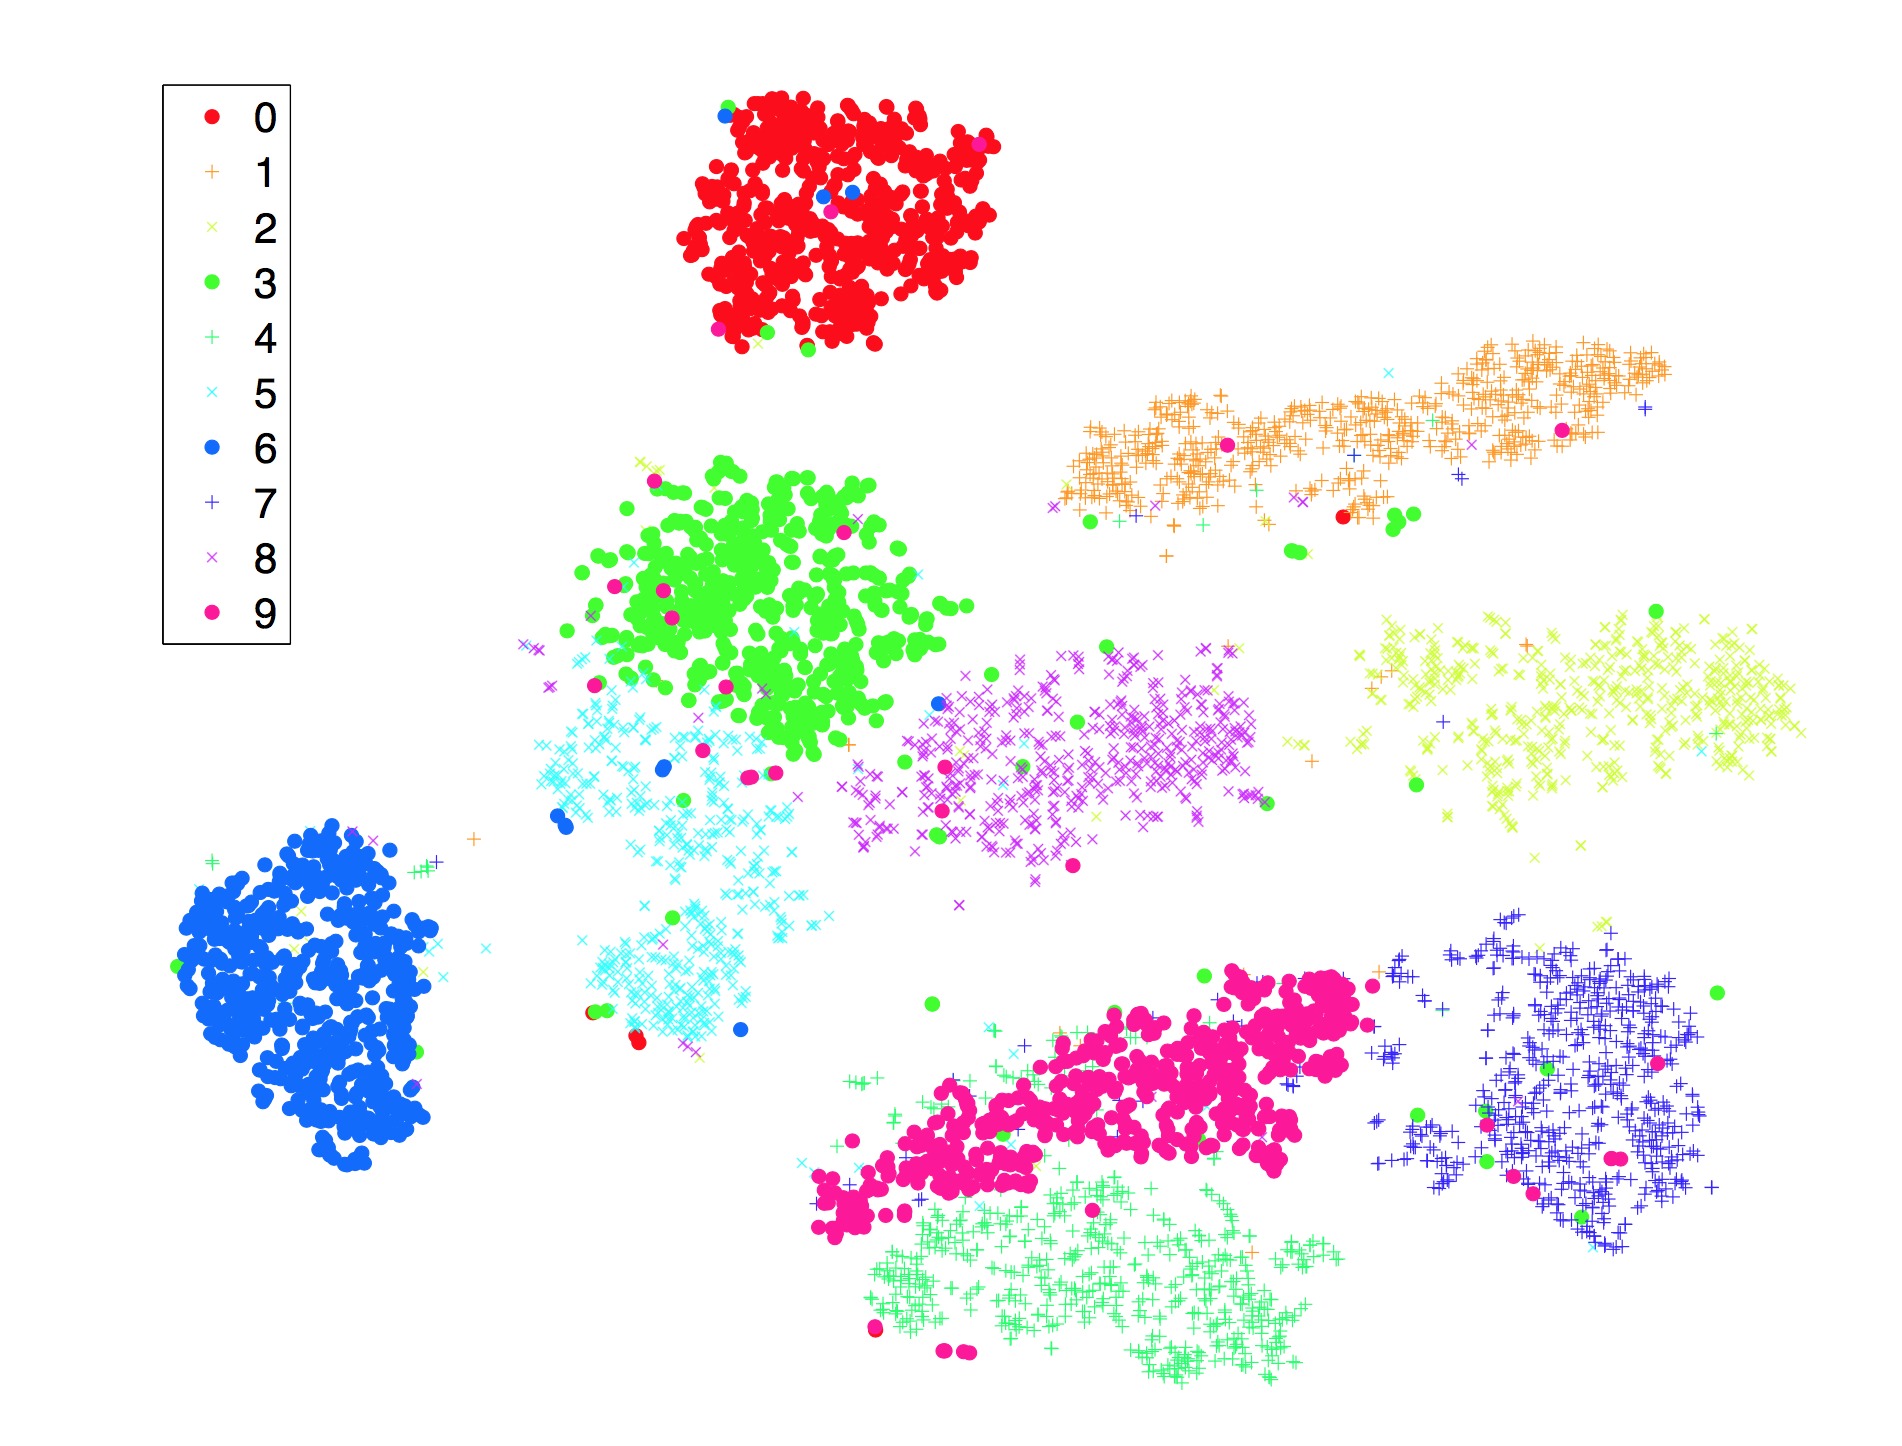 A t-SNE plot of the MNIST dataset that attempts to represent the digits in a 2D plane while preserving the topology of the data. (Reproduced from Maaten and Hinton, 2008.)